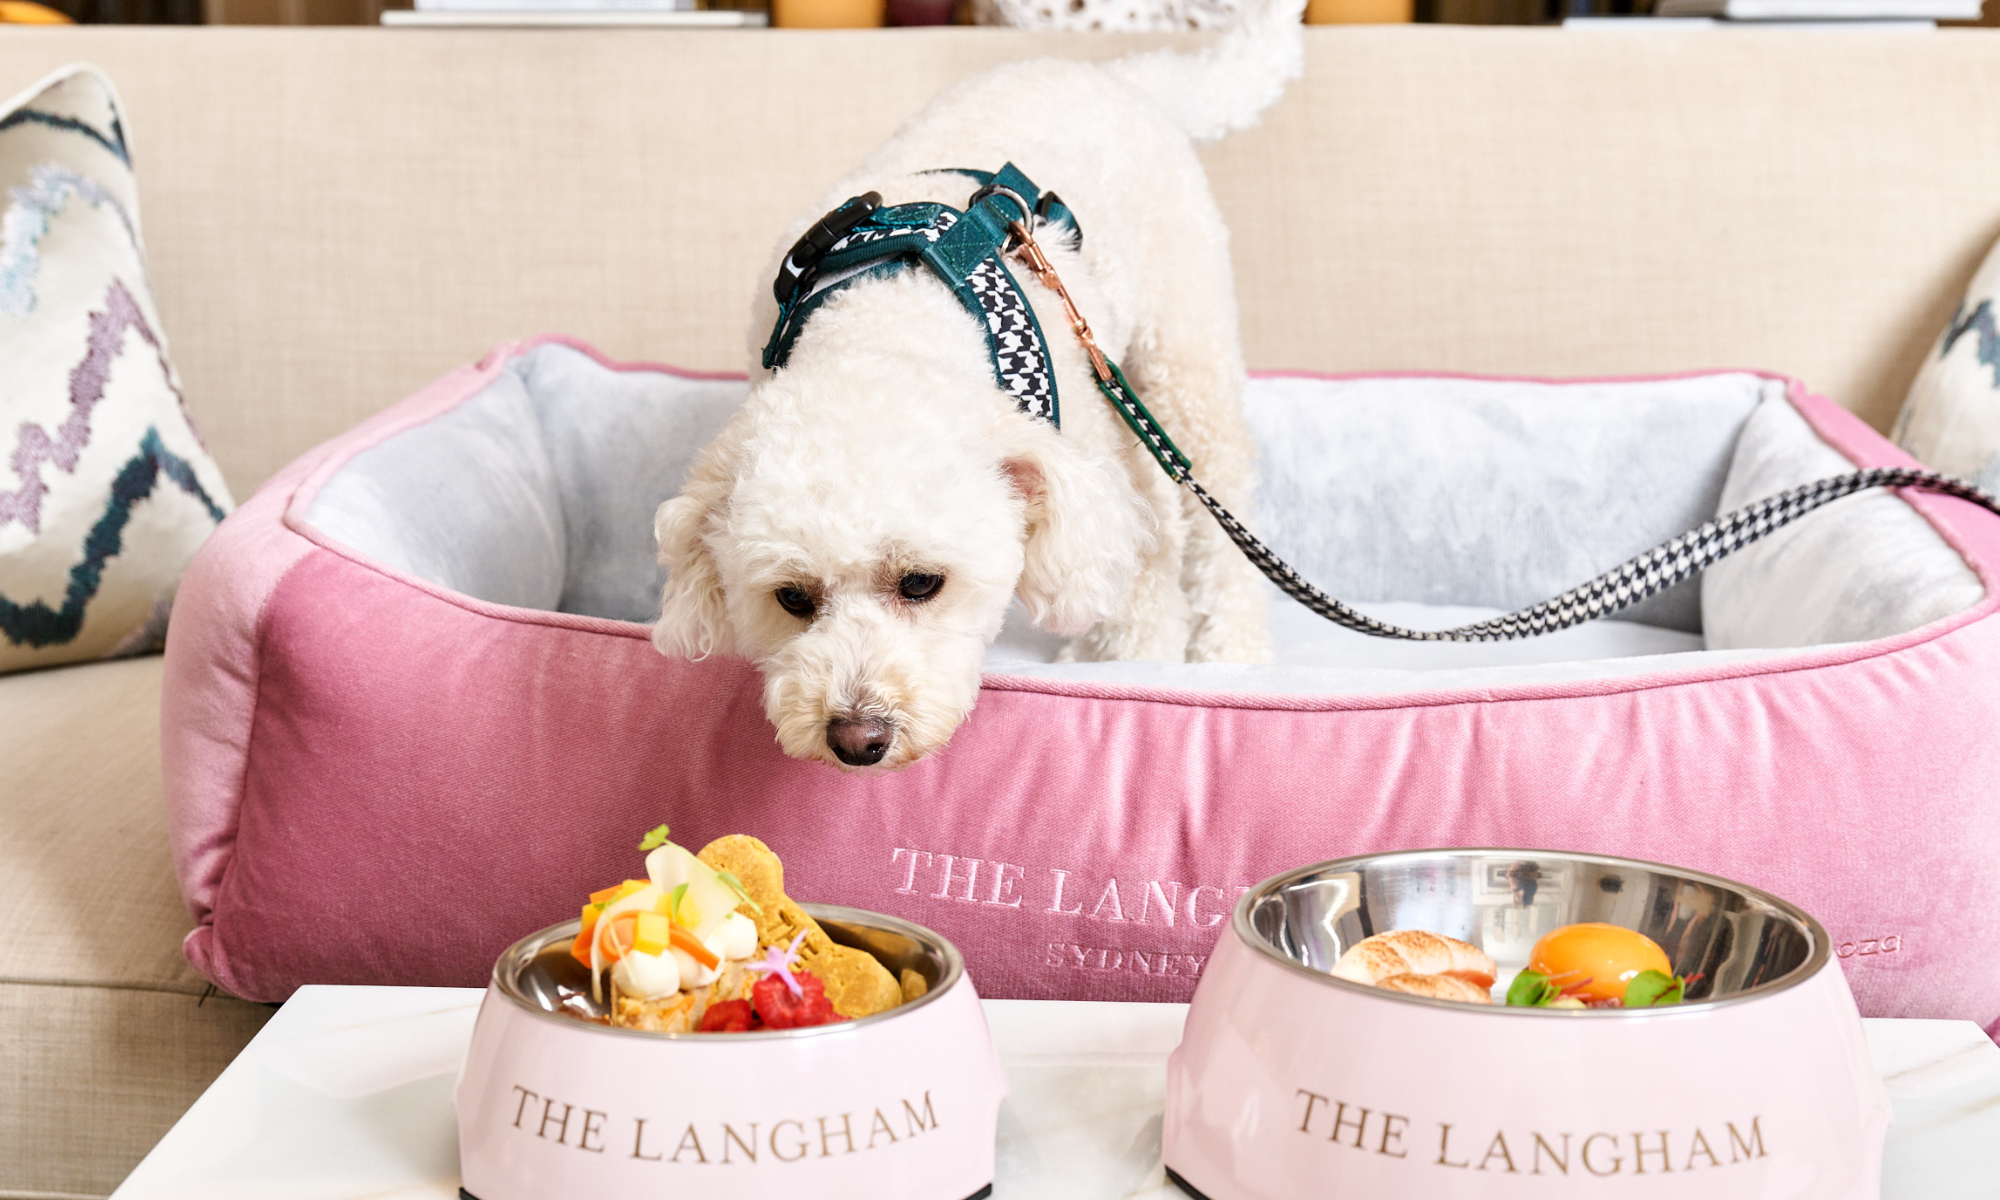 The Langham Sydney Luxury Hotel room offer "pampered pets staycation"